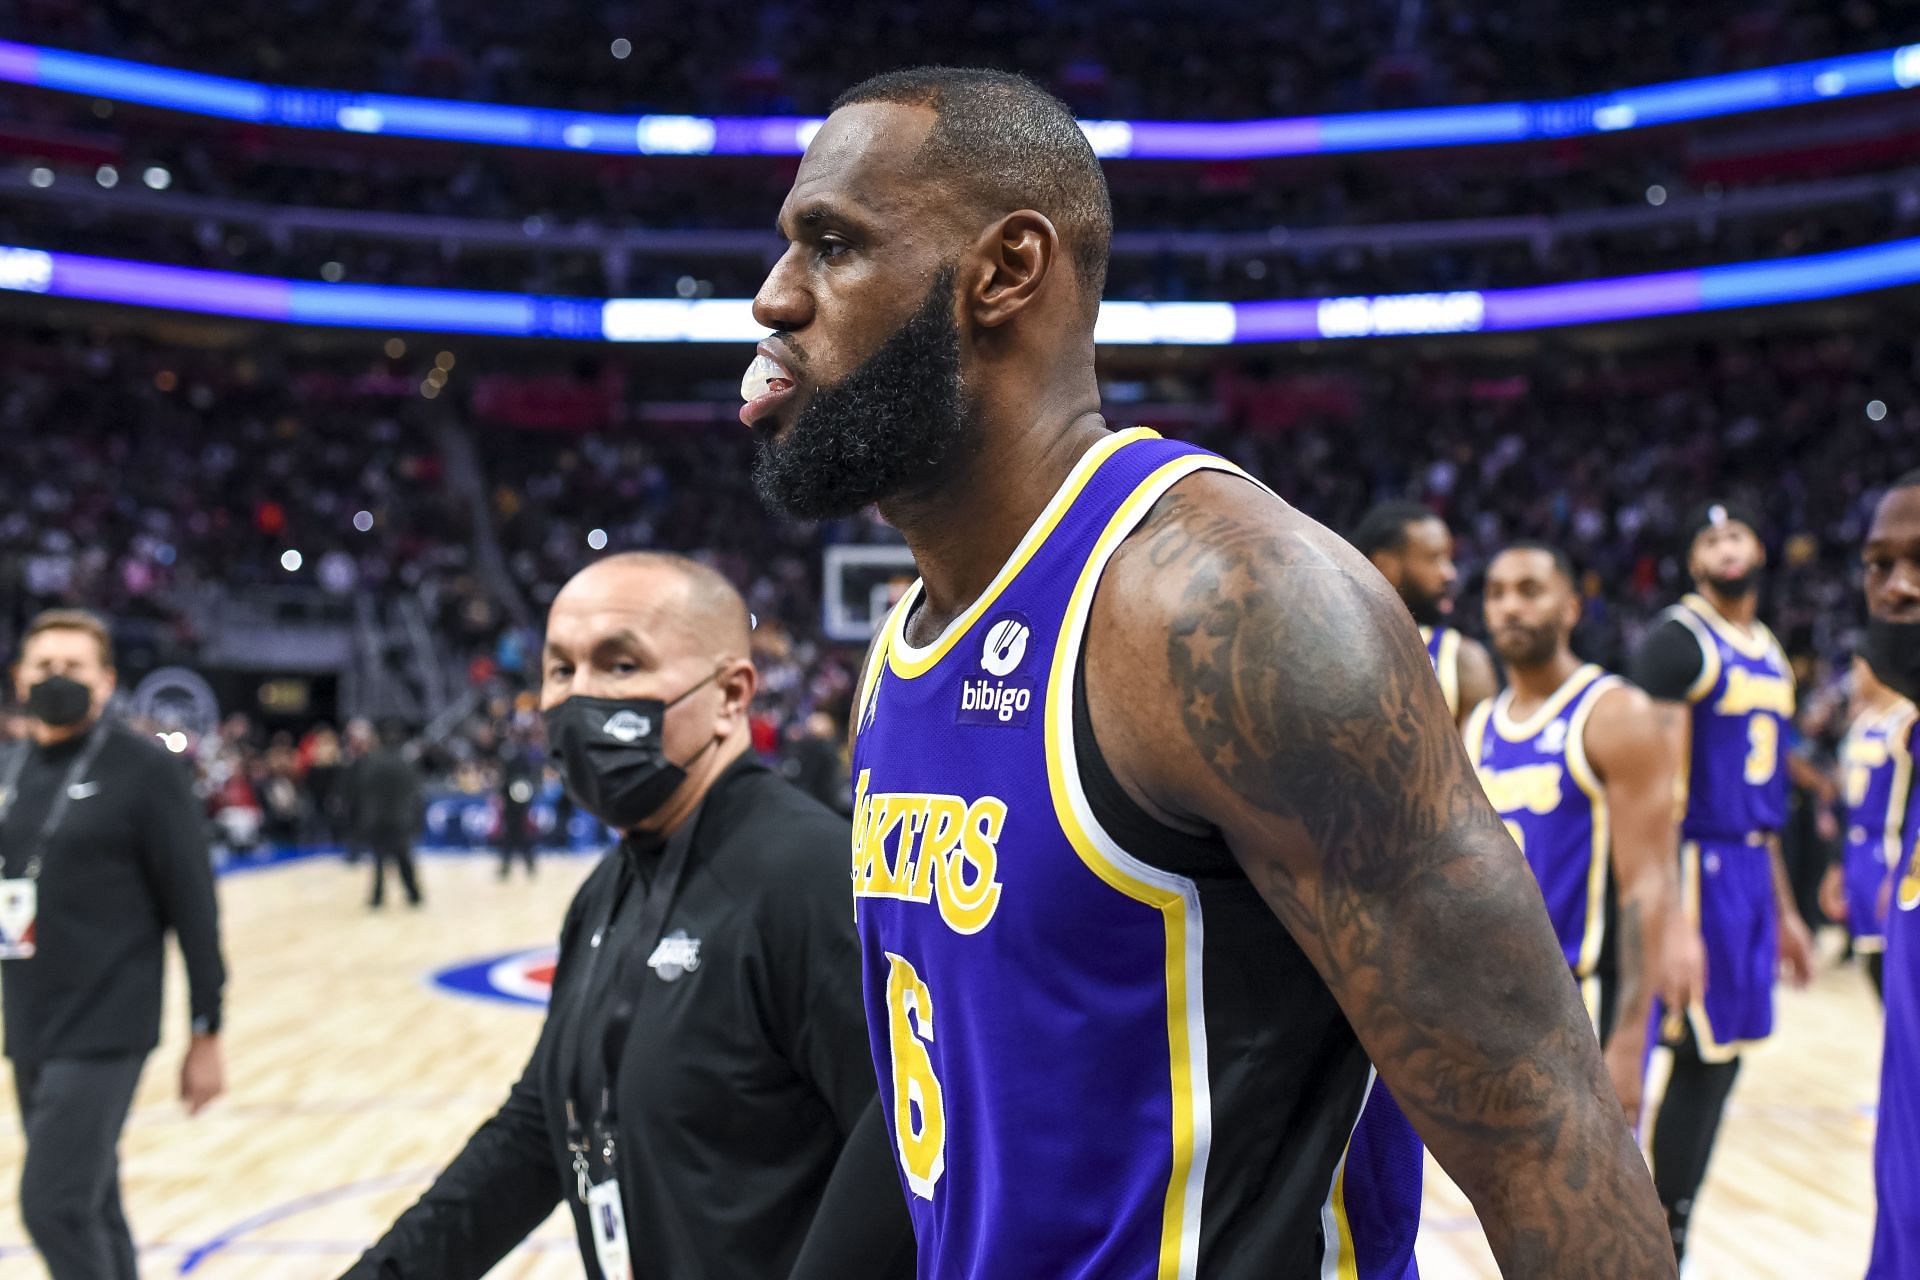 LeBron James was ejected for the second time in his NBA career on Sunday night versus Detroit Pistons